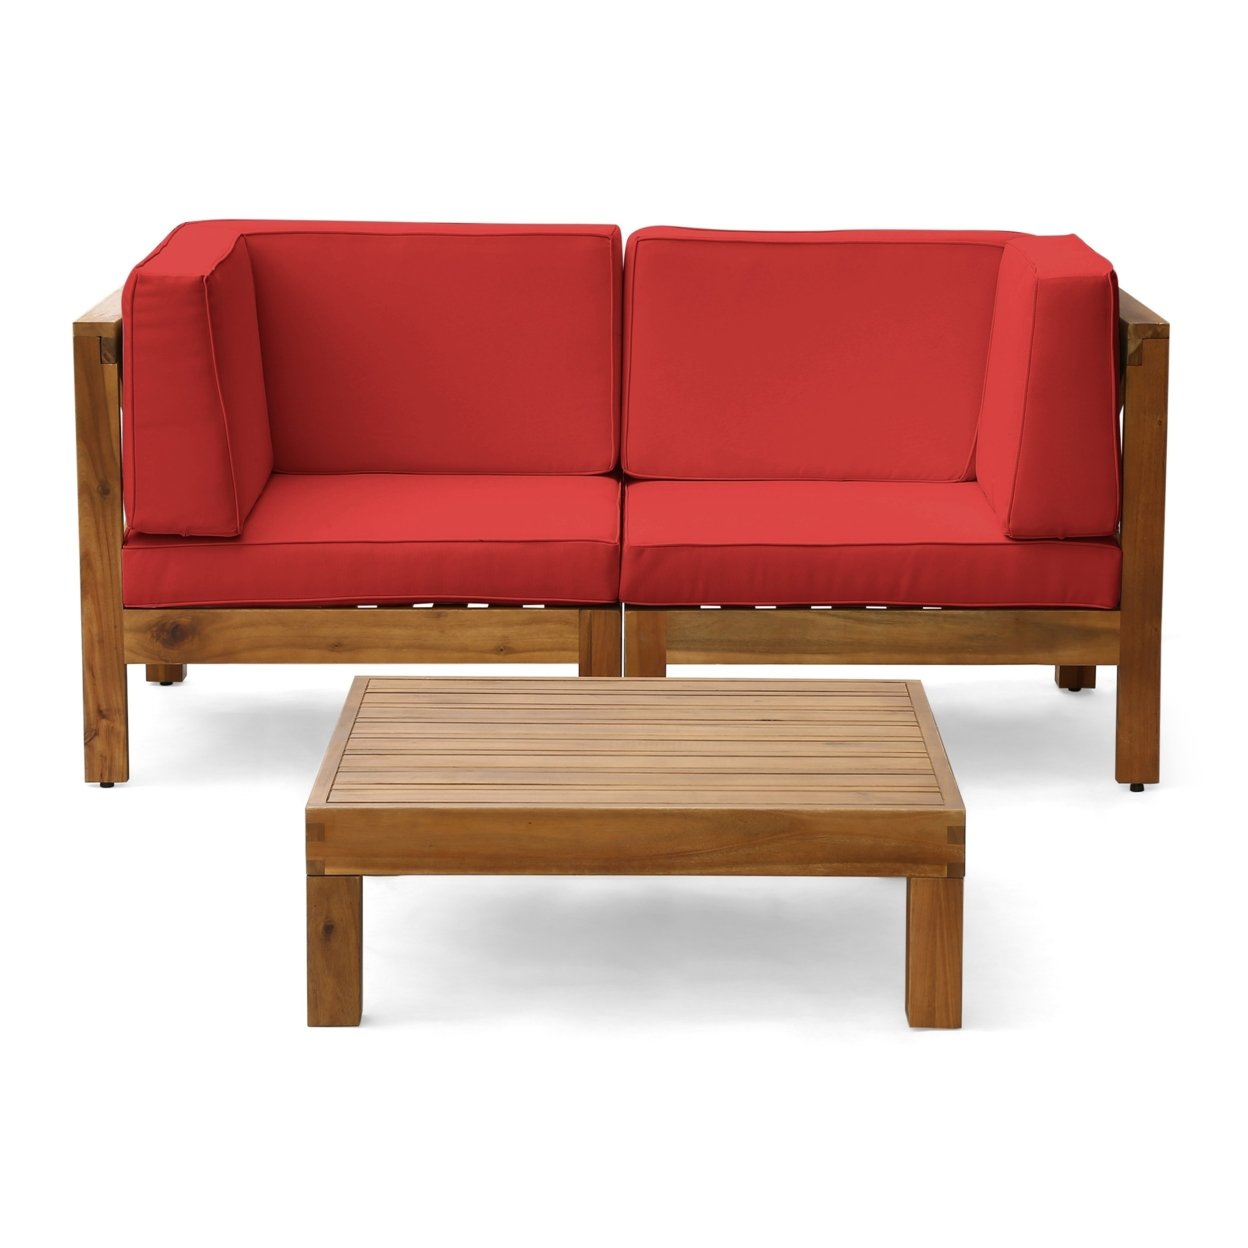 Dawson Outdoor Sectional Love Seat Set With Coffee Table - 3-Piece 2-Seater - Acacia Wood - Outdoor Cushions - Red, Teak